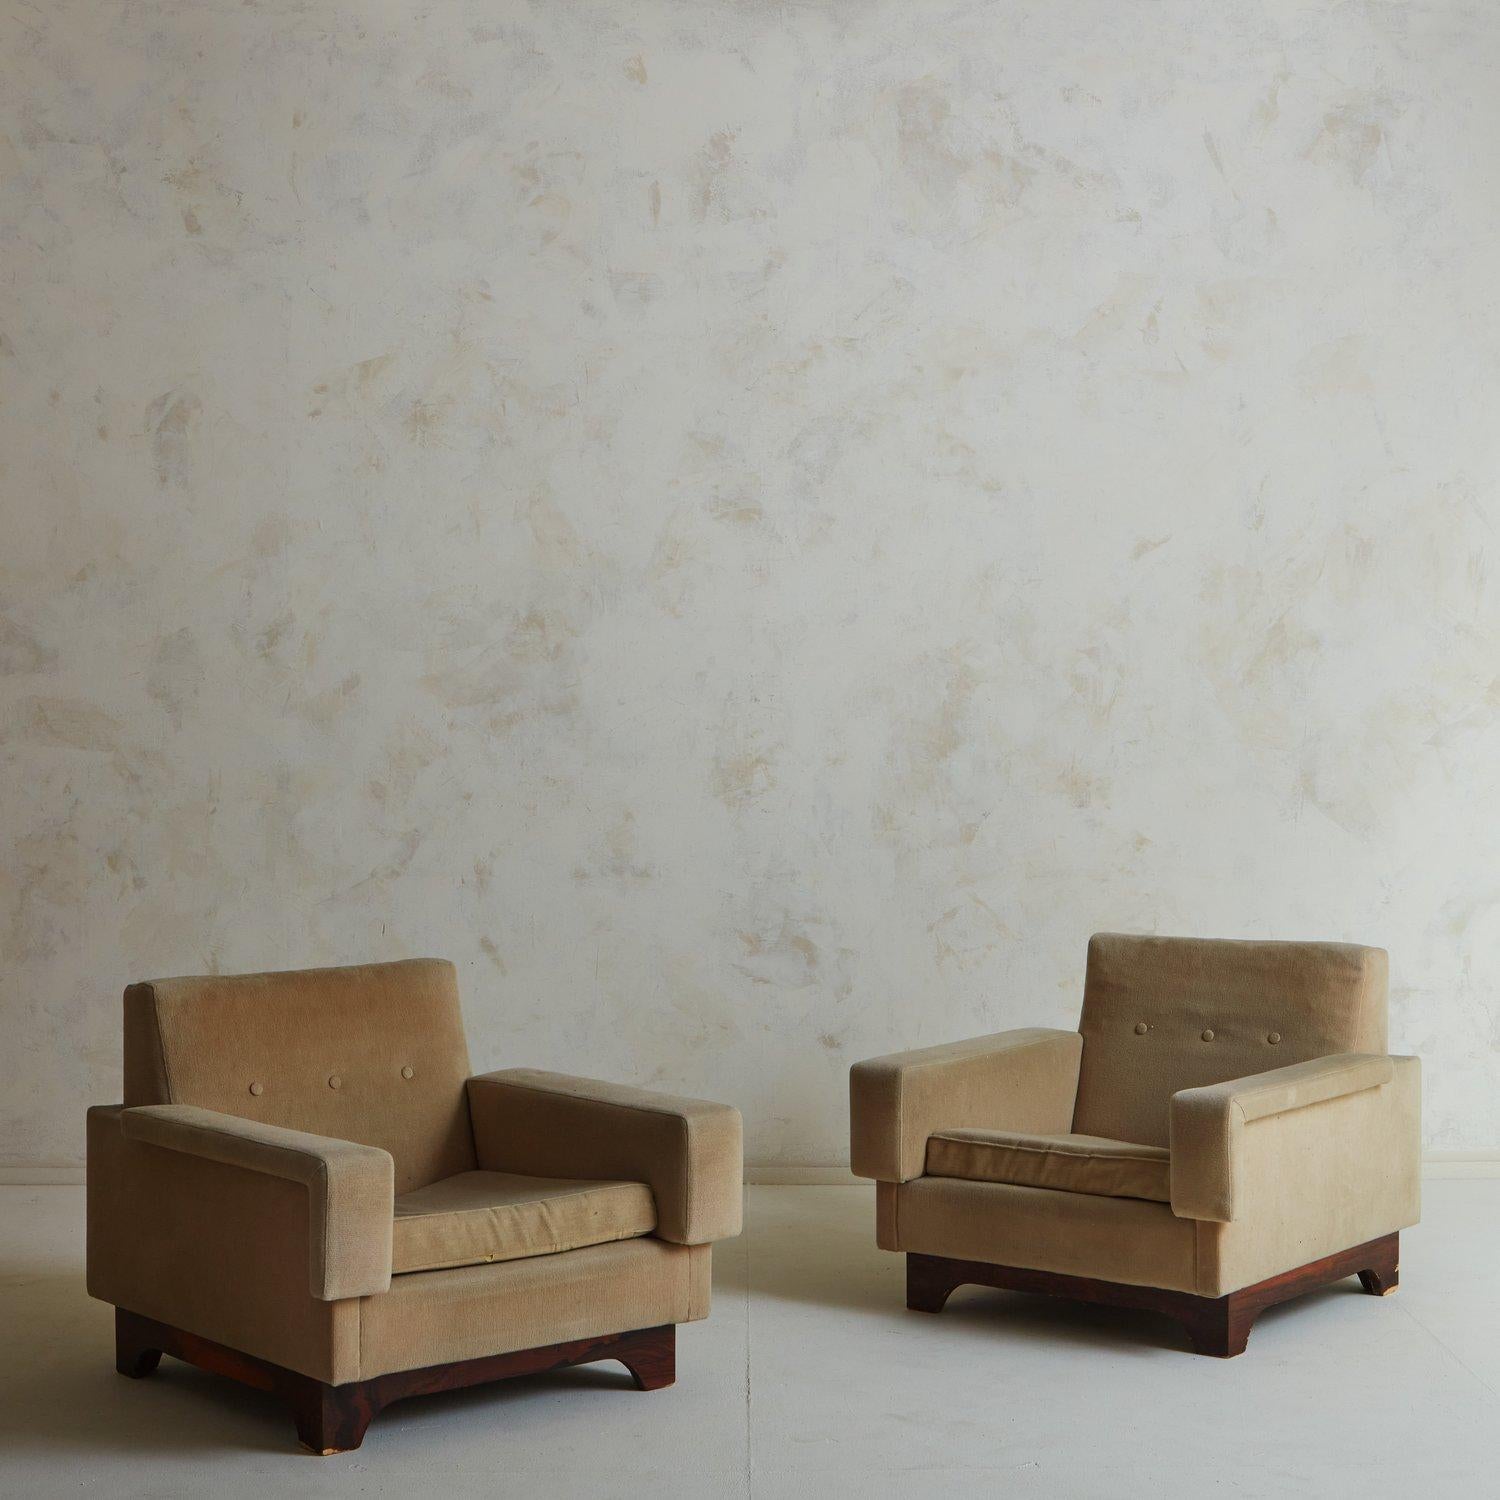 A stately pair of mid-century lounge chairs by Saporiti Italia. These chairs have carved wood bases with beautiful graining and feature sleek, angular lines. They retain their original taupe upholstery with three buttons on each seat back.